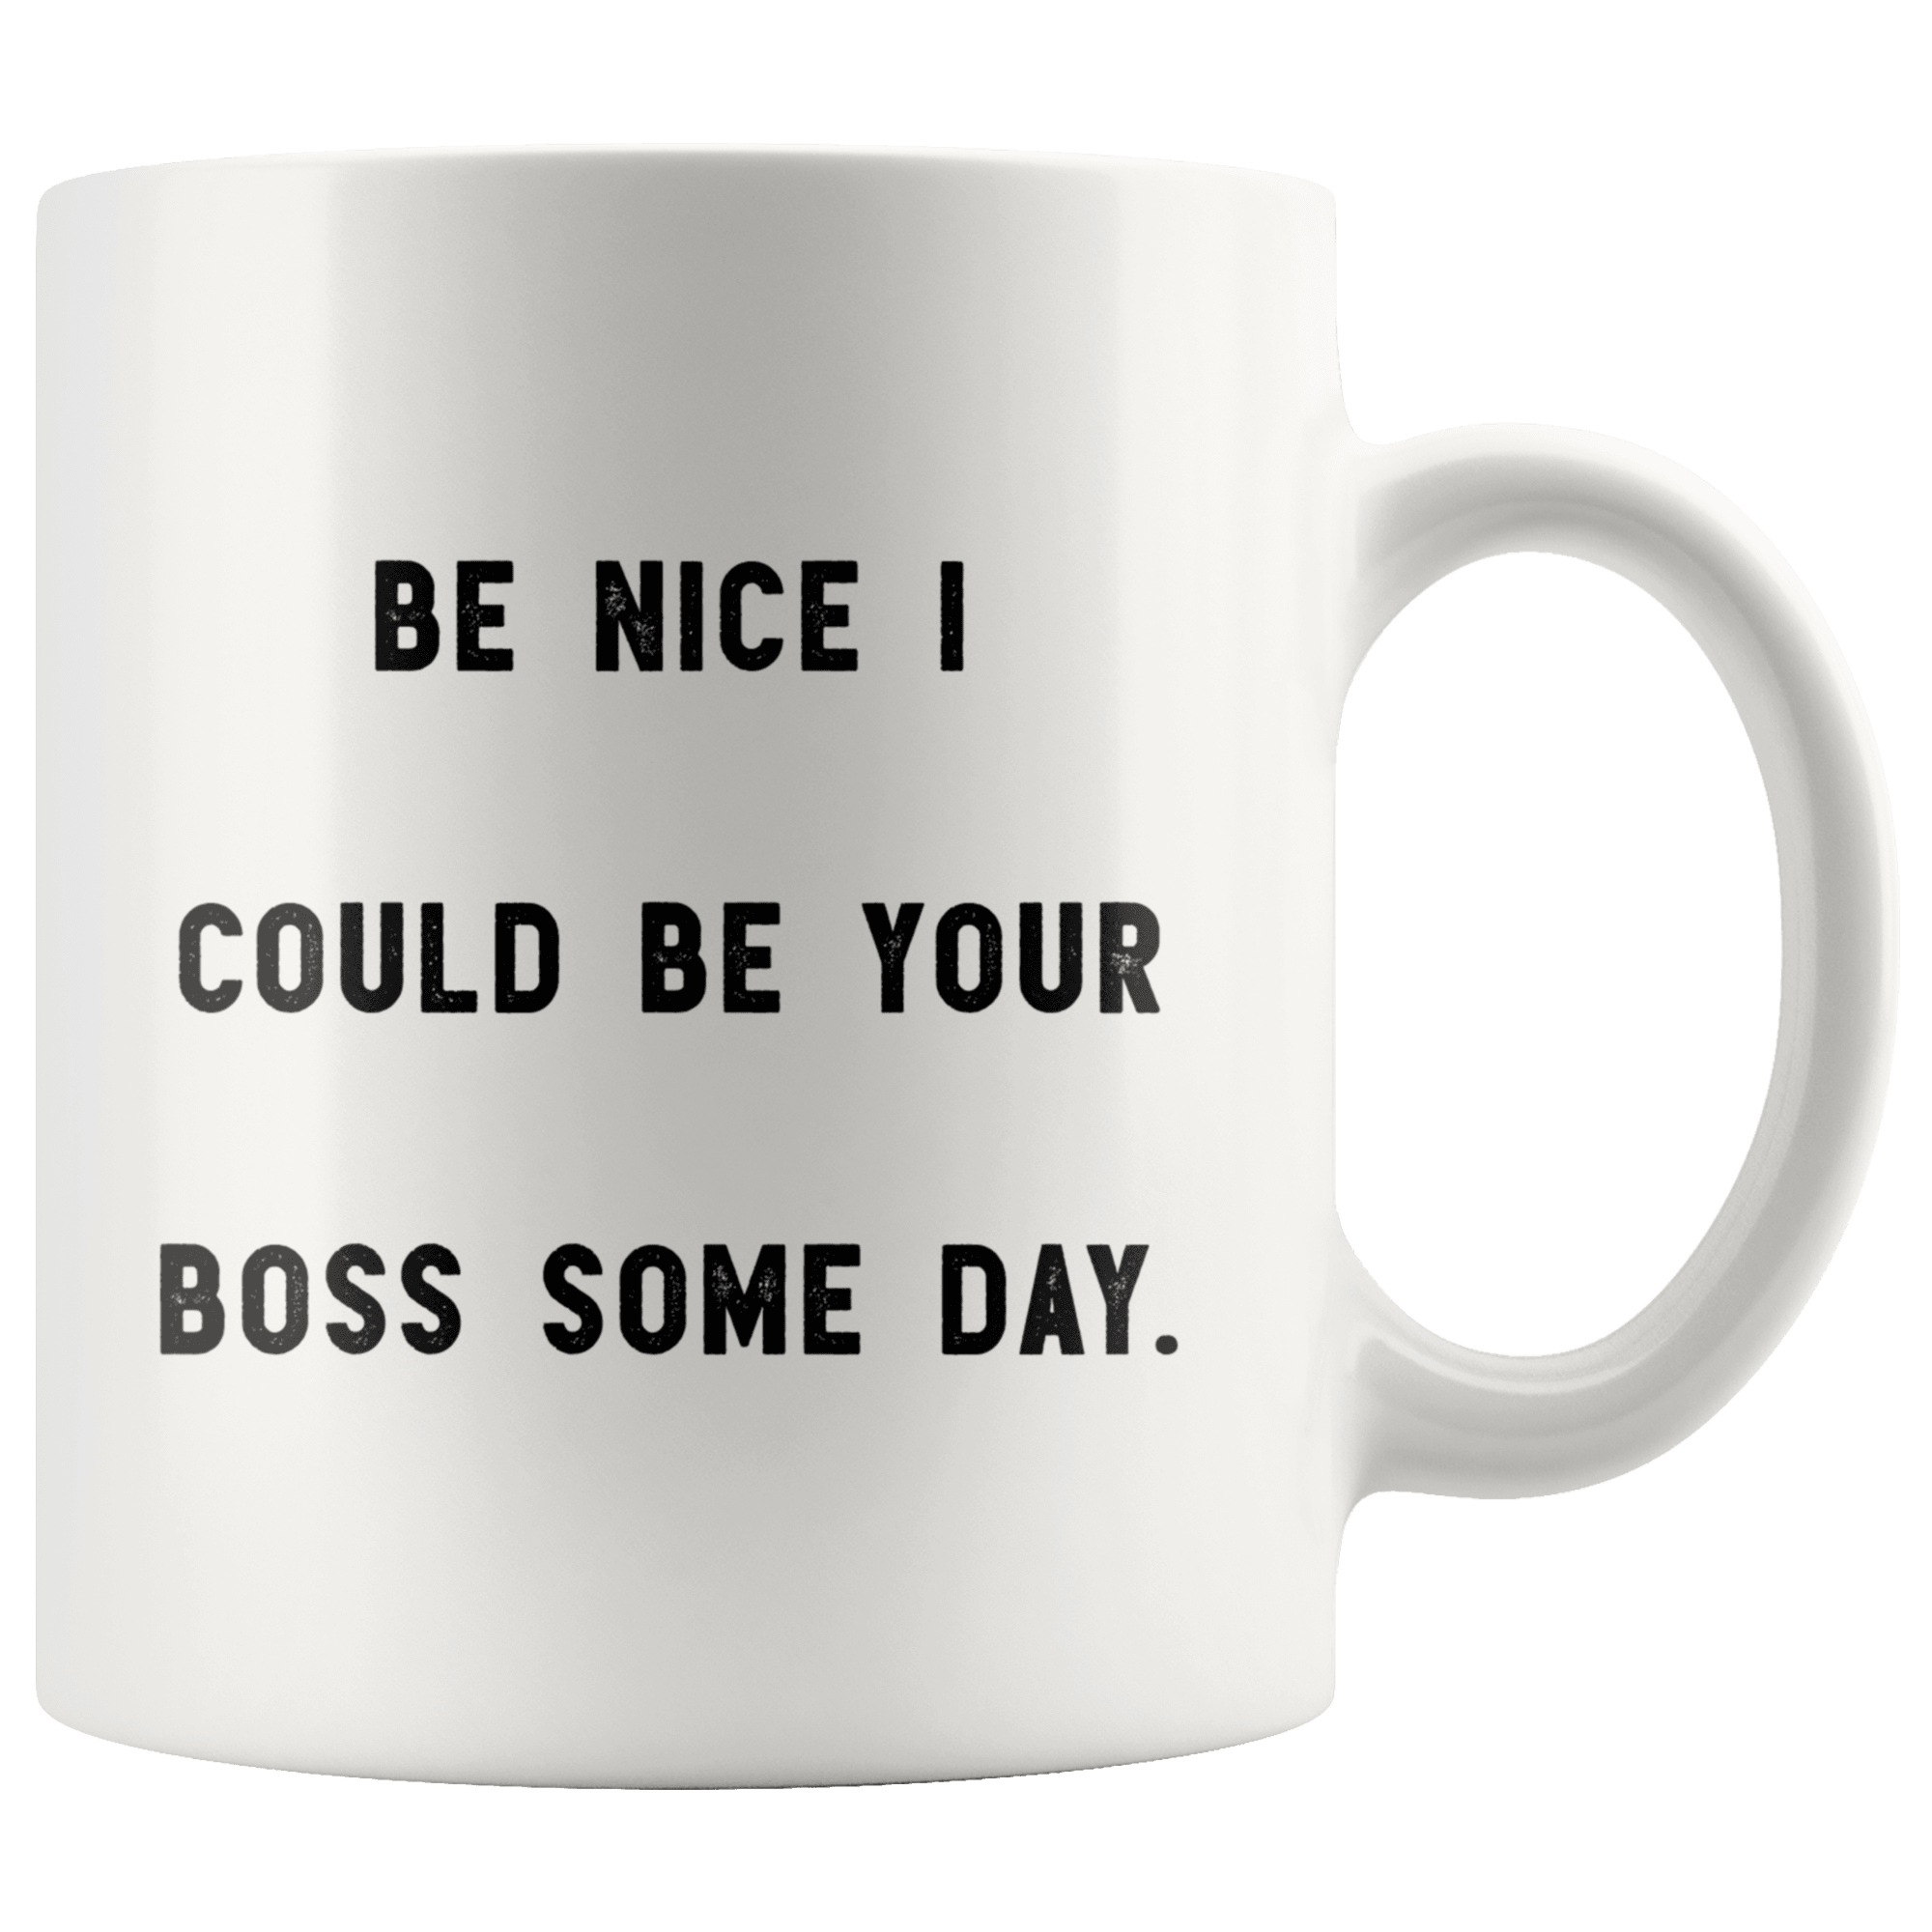 13 Amazing Farewell Gifts For Your Boss